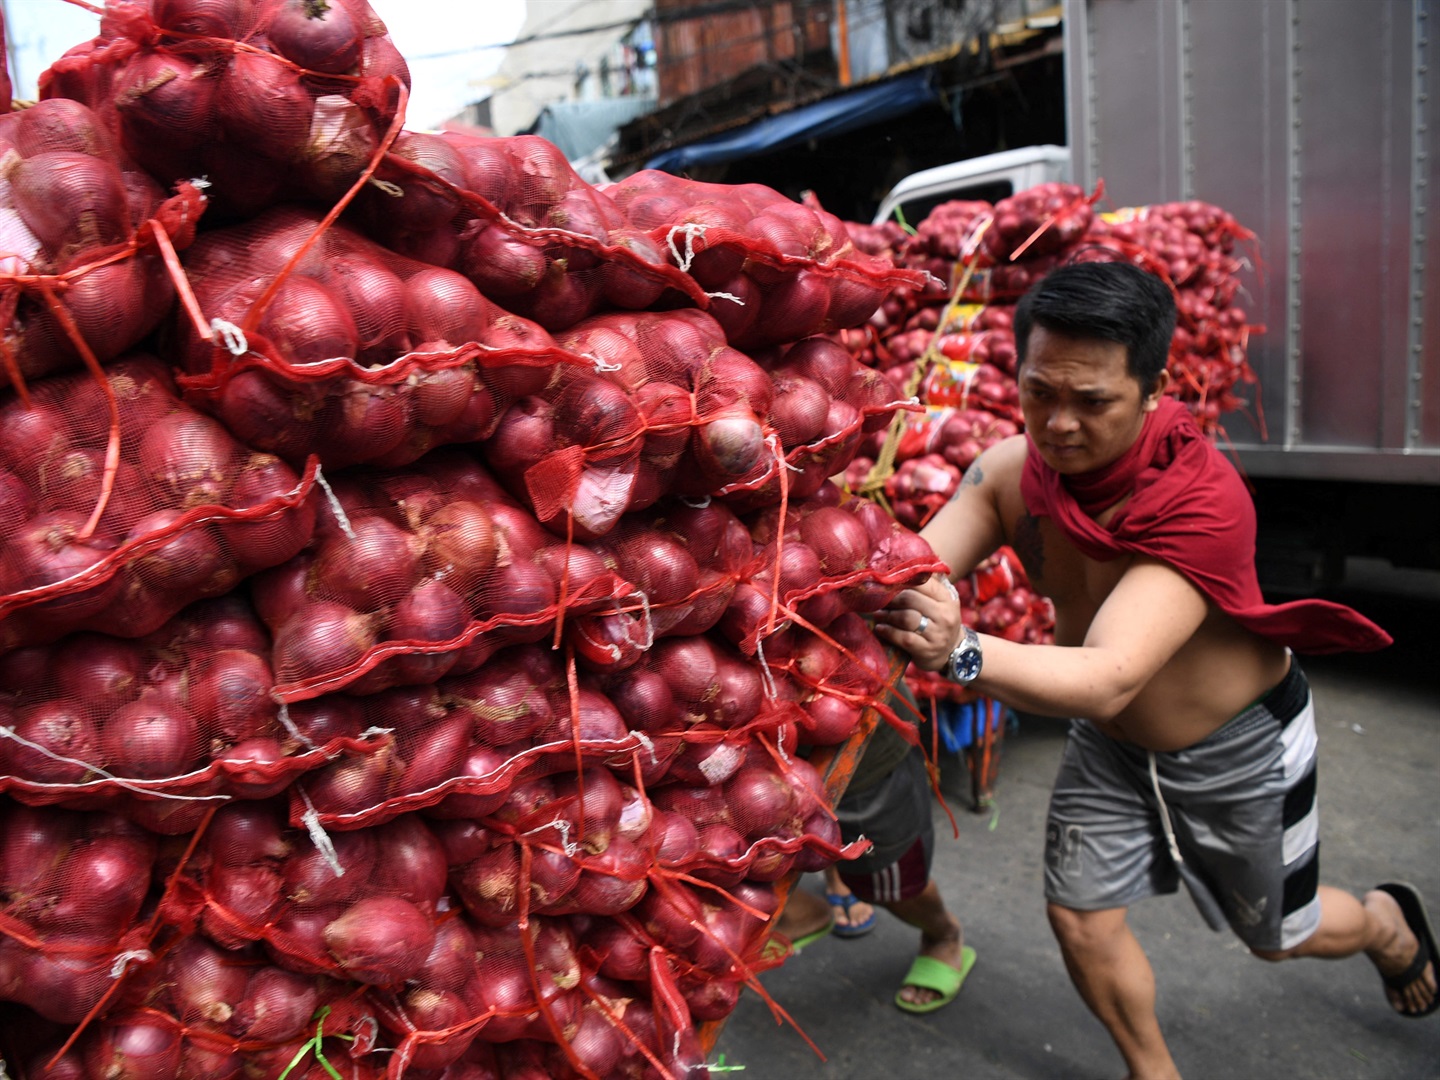 Onions are now so expensive in the Philippines that they've become a luxury item